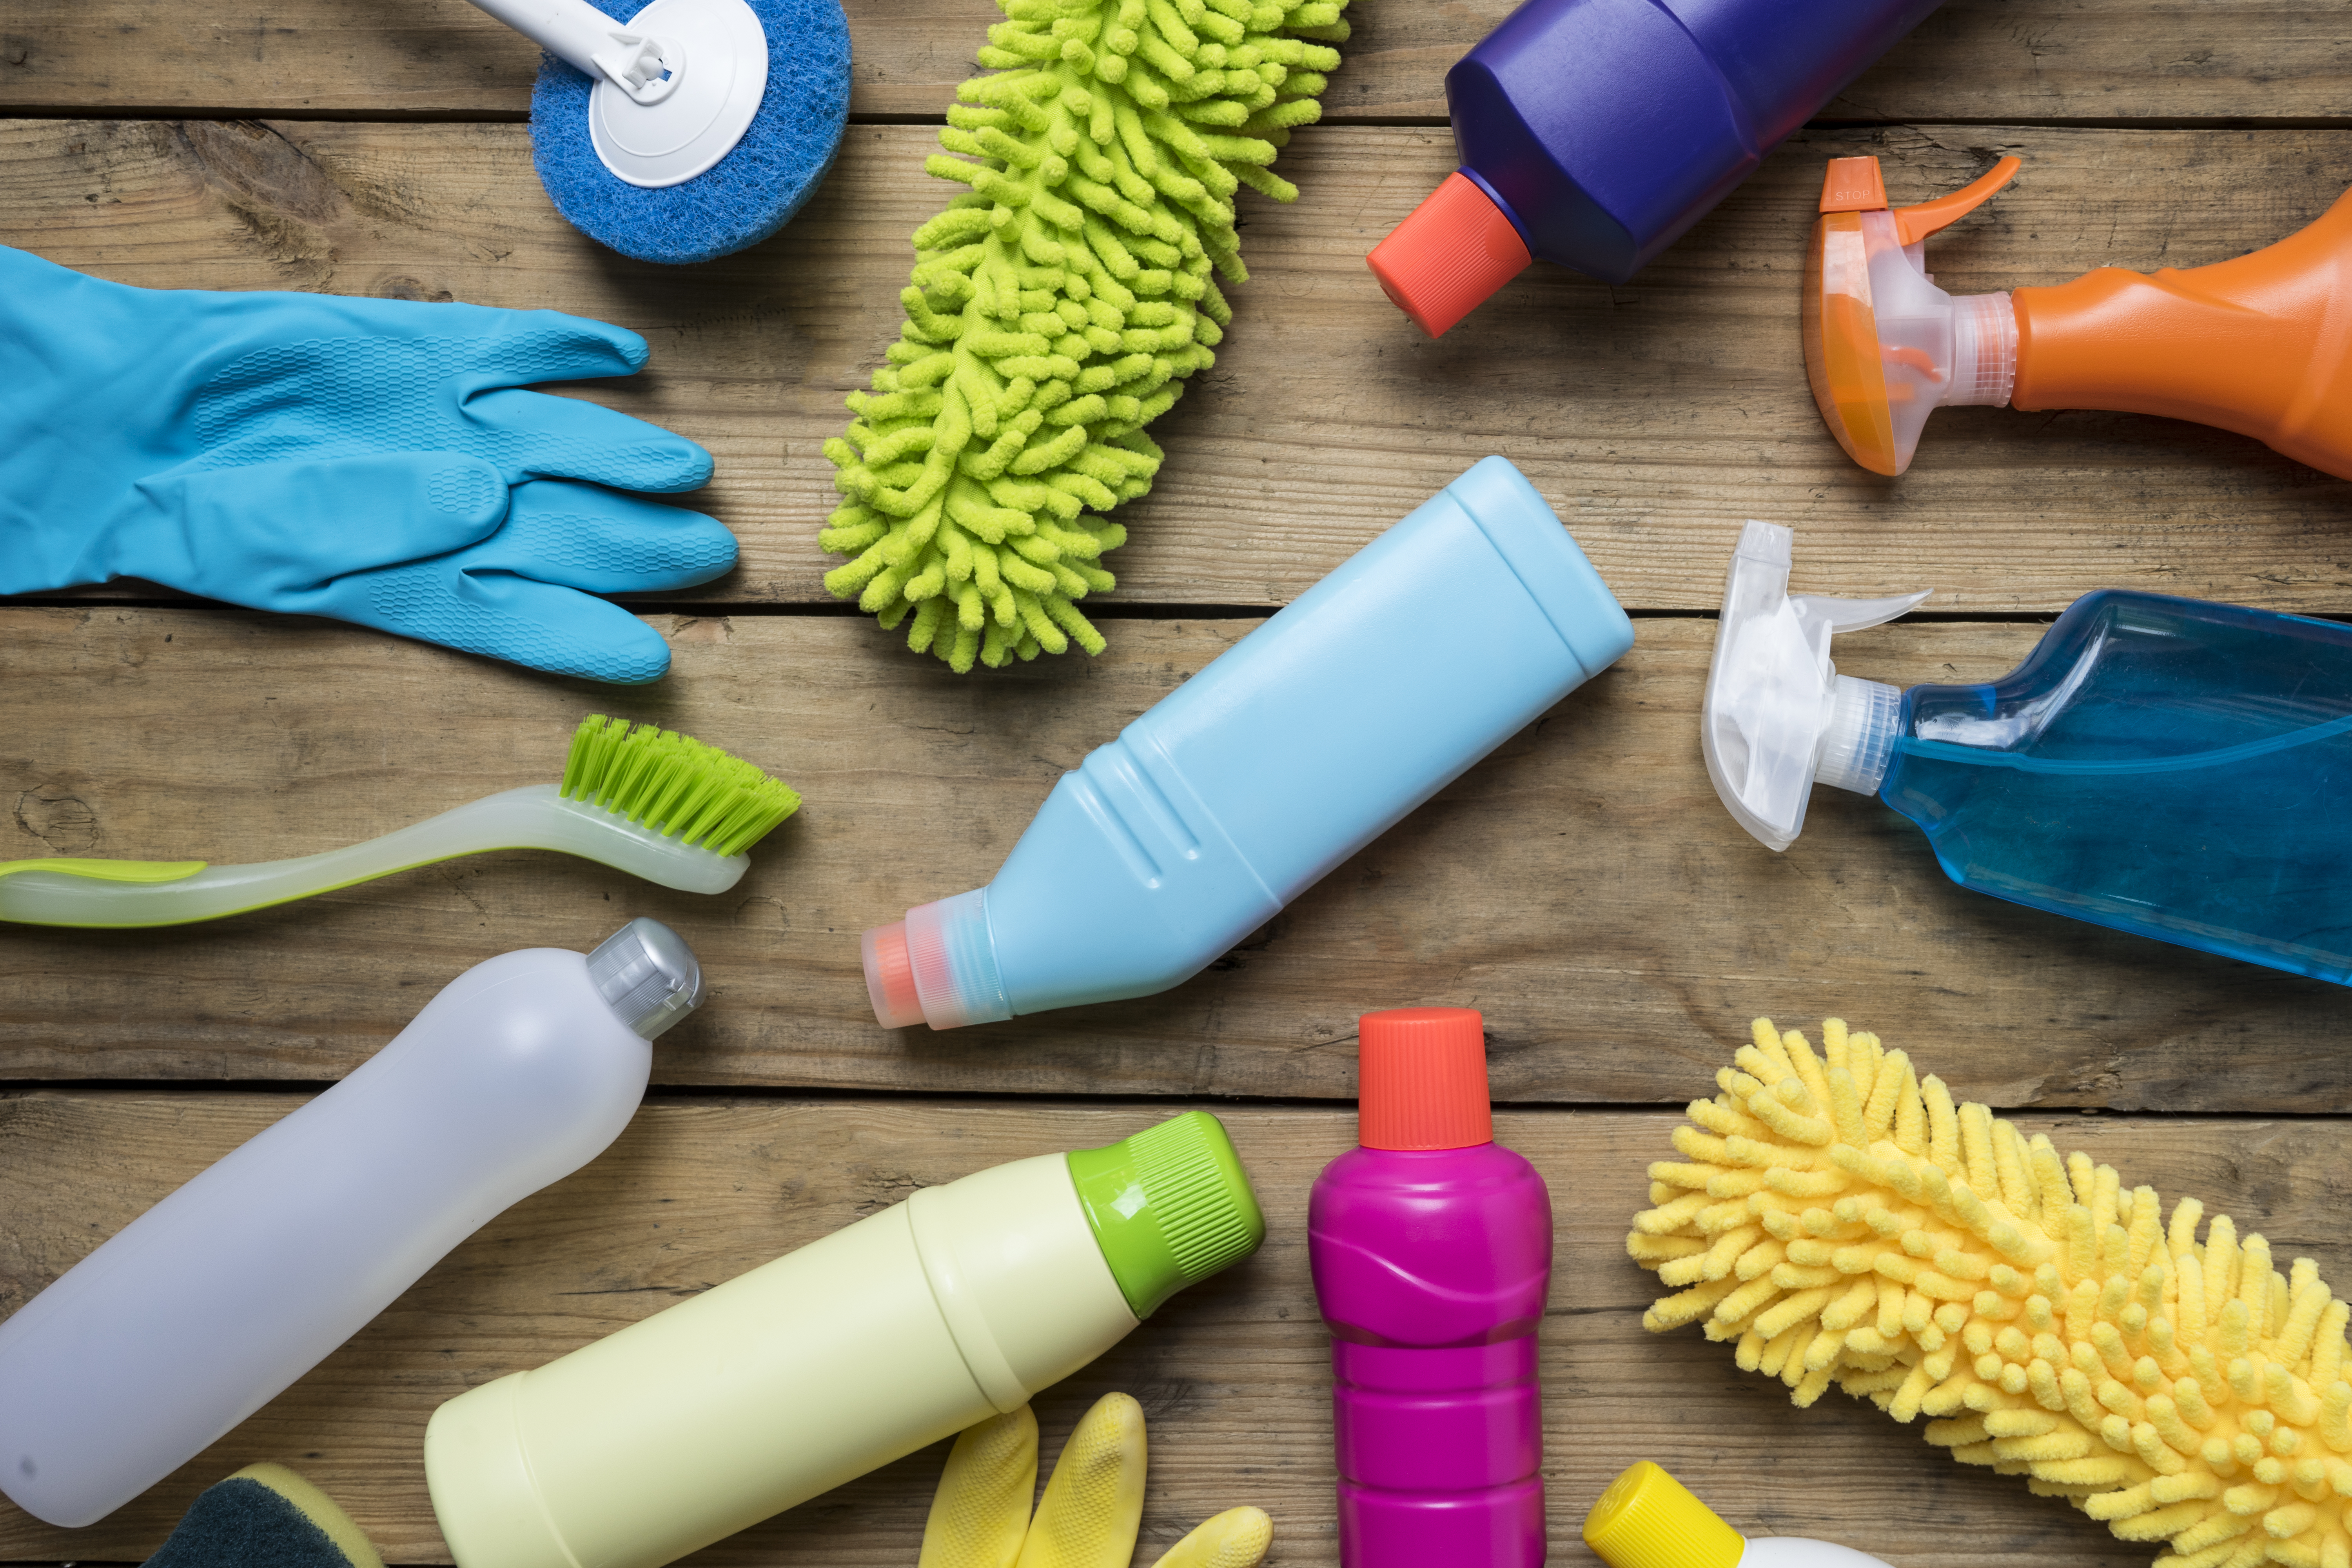 Allergies: Household Products Could Worsen Some Allergies